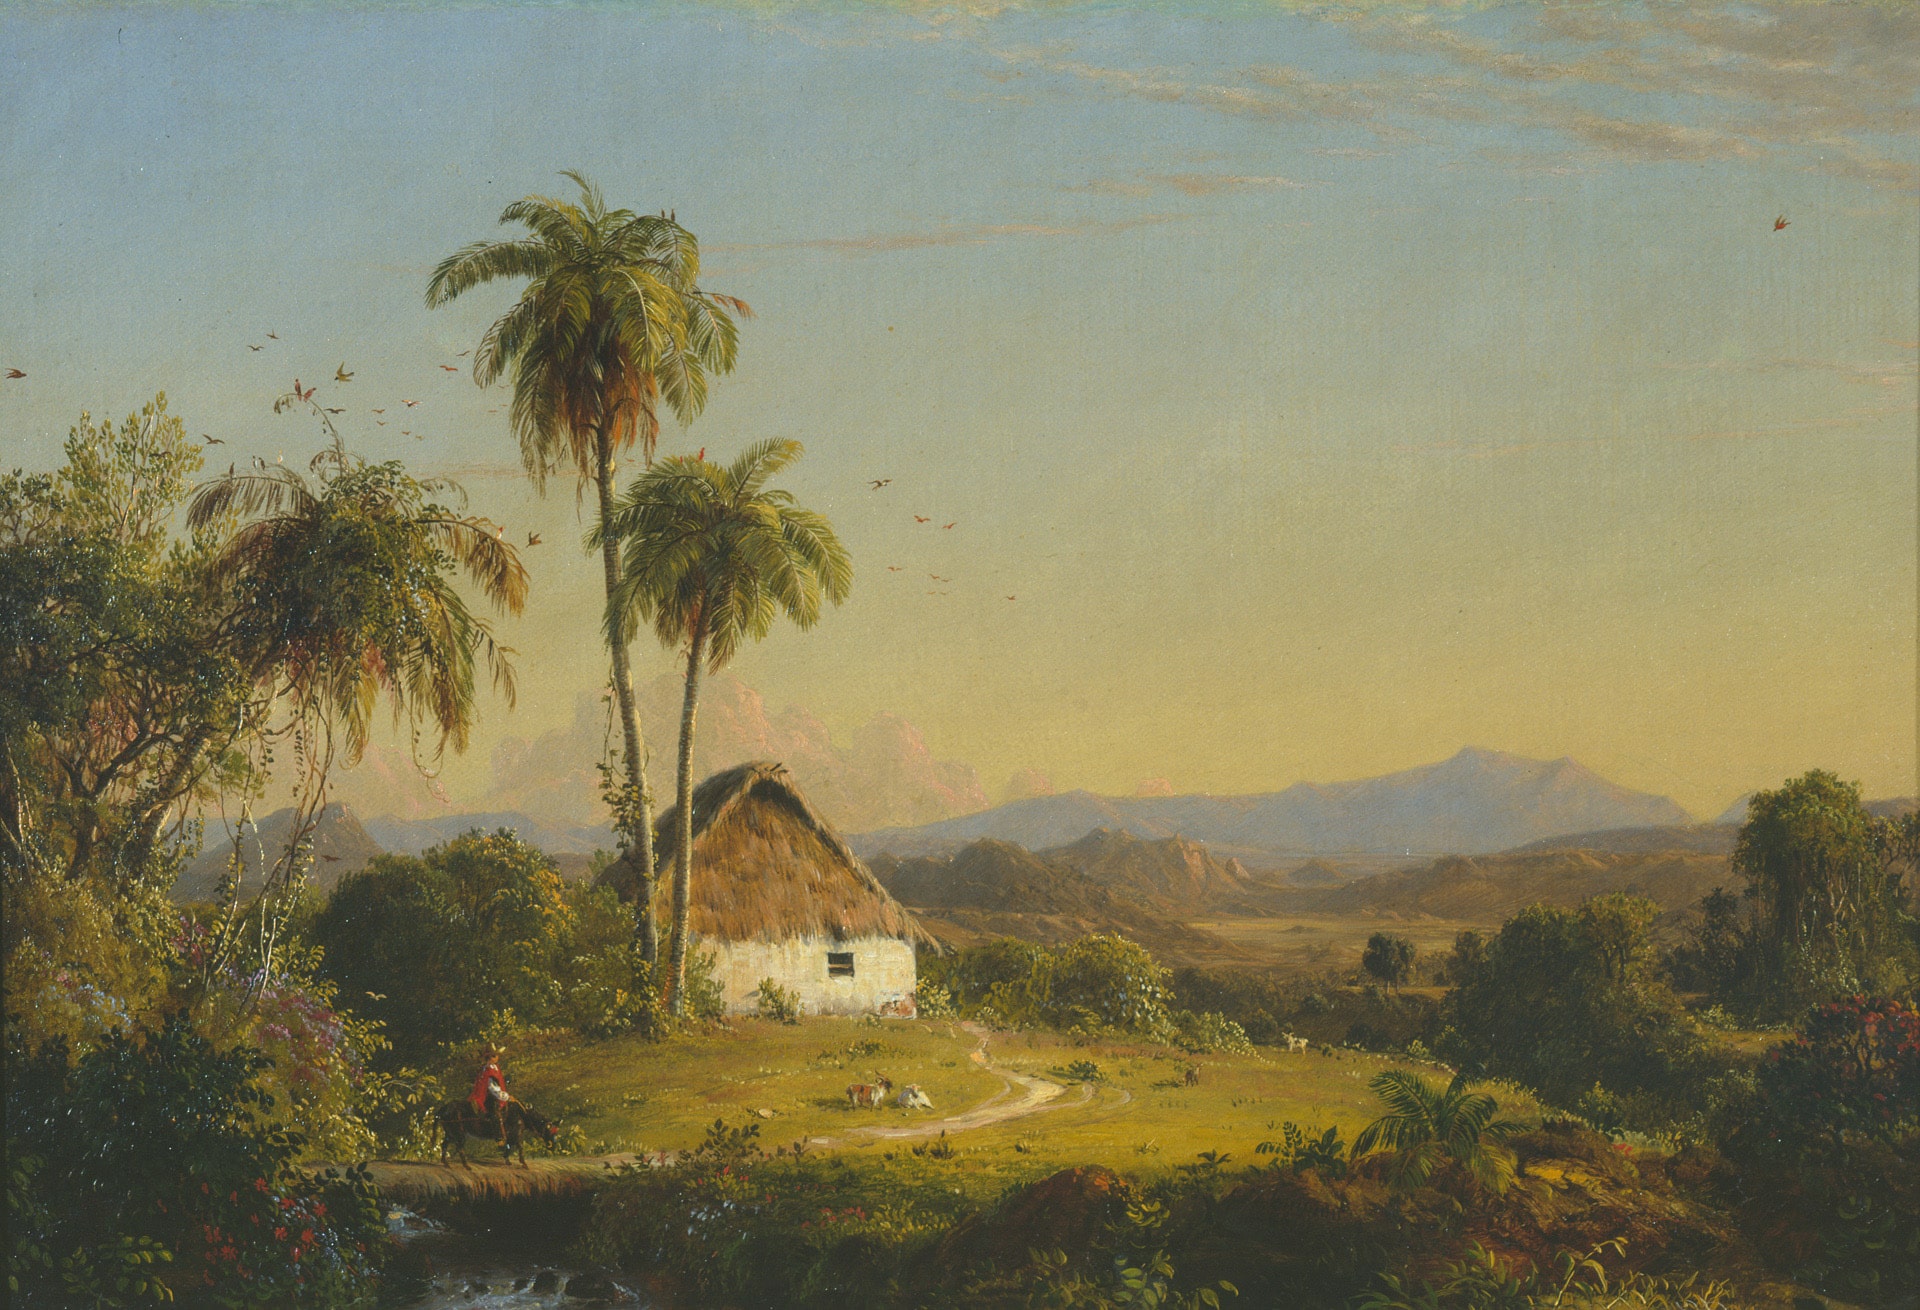 a landscape with palm trees, a building with a thatched roof and a mountain in the distance